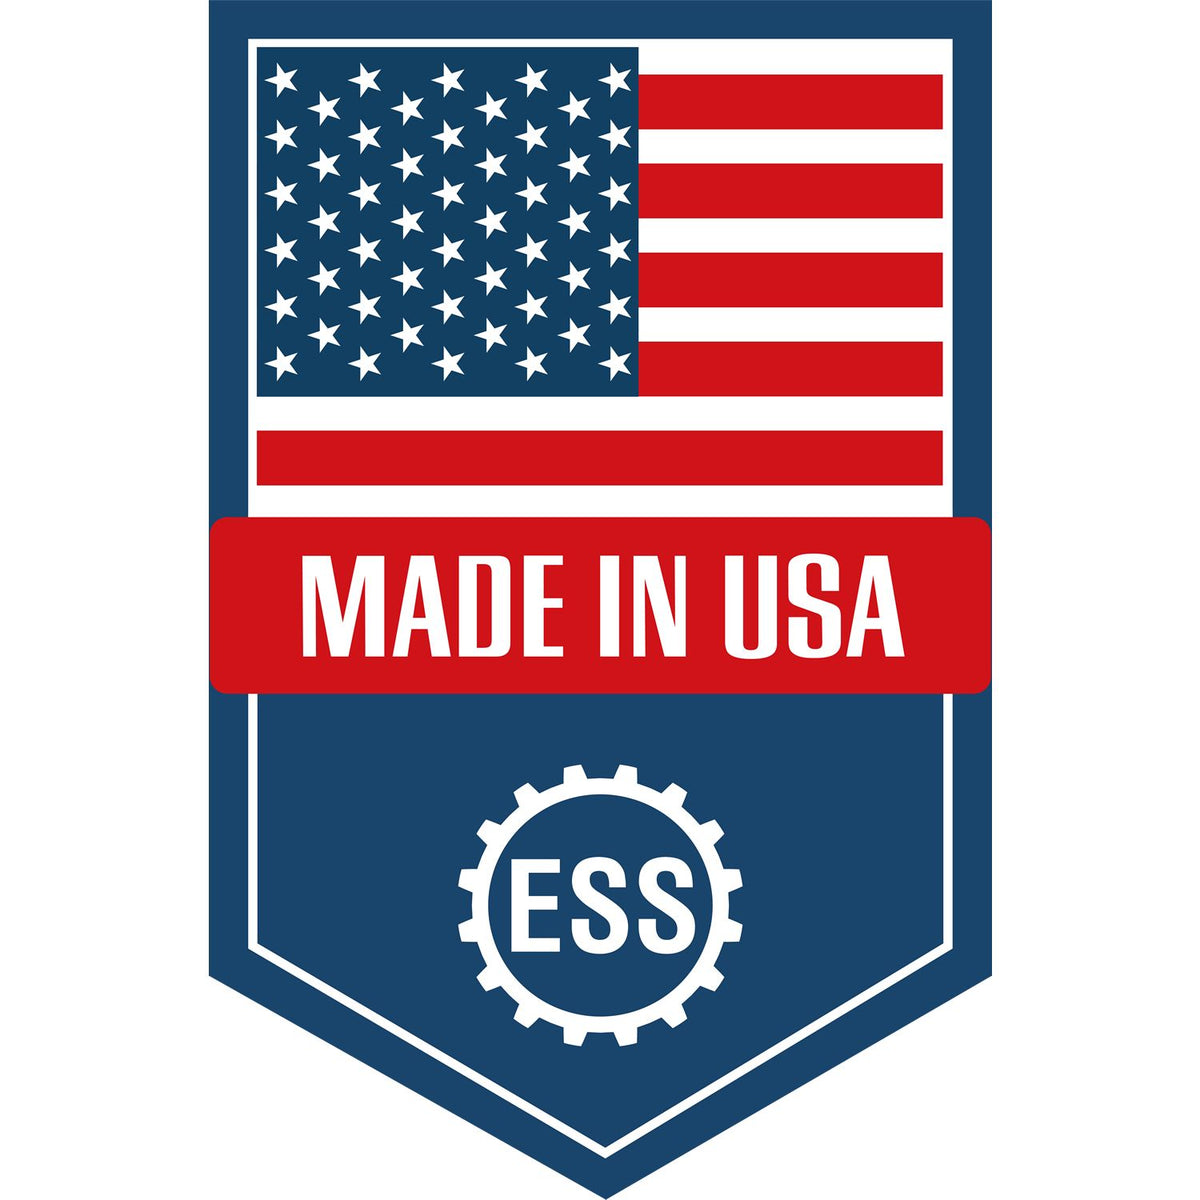 An icon or graphic with an american flag and text reading Made in USA for the Slim Pre-Inked Maryland Landscape Architect Seal Stamp